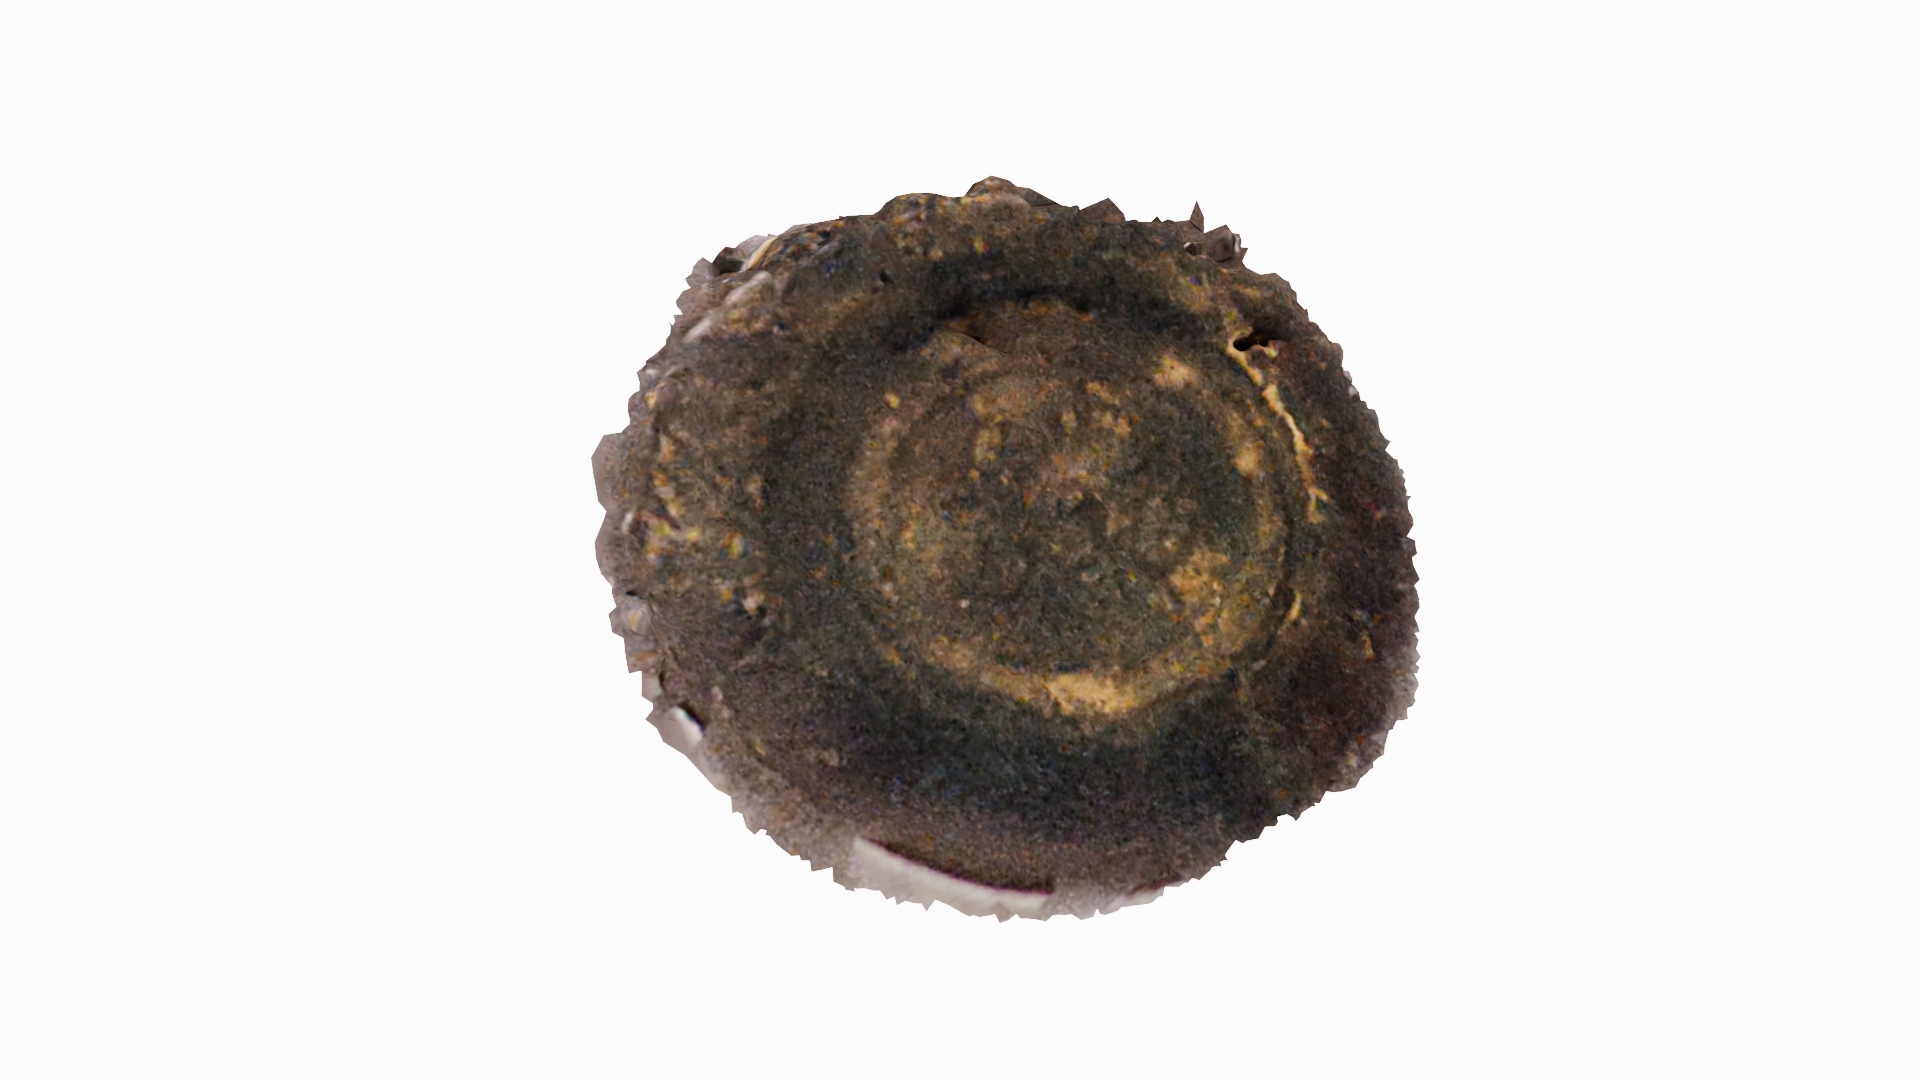 3D model created from composite images of the Copper alloy button.